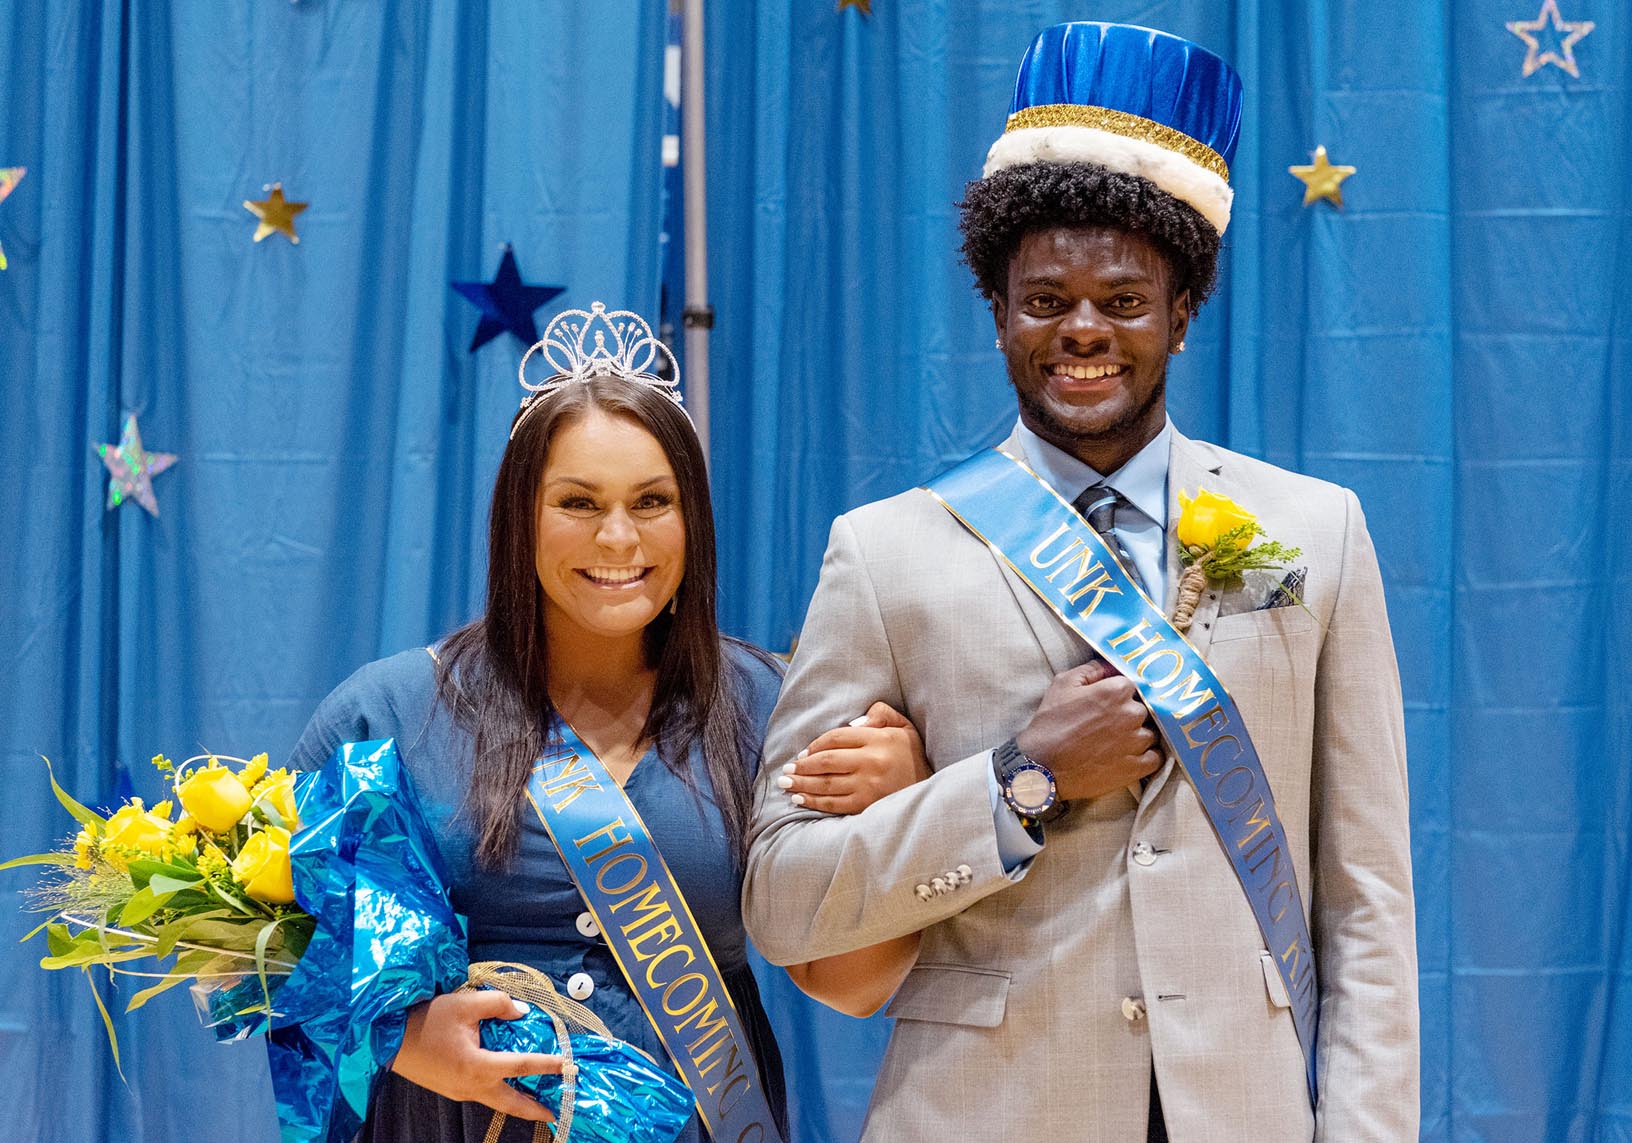 Fayth Jackson of Lincoln and Gabriel Amegatcher of Romeoville, Illinois, were crowned UNK homecoming queen and king during a ceremony Thursday evening.